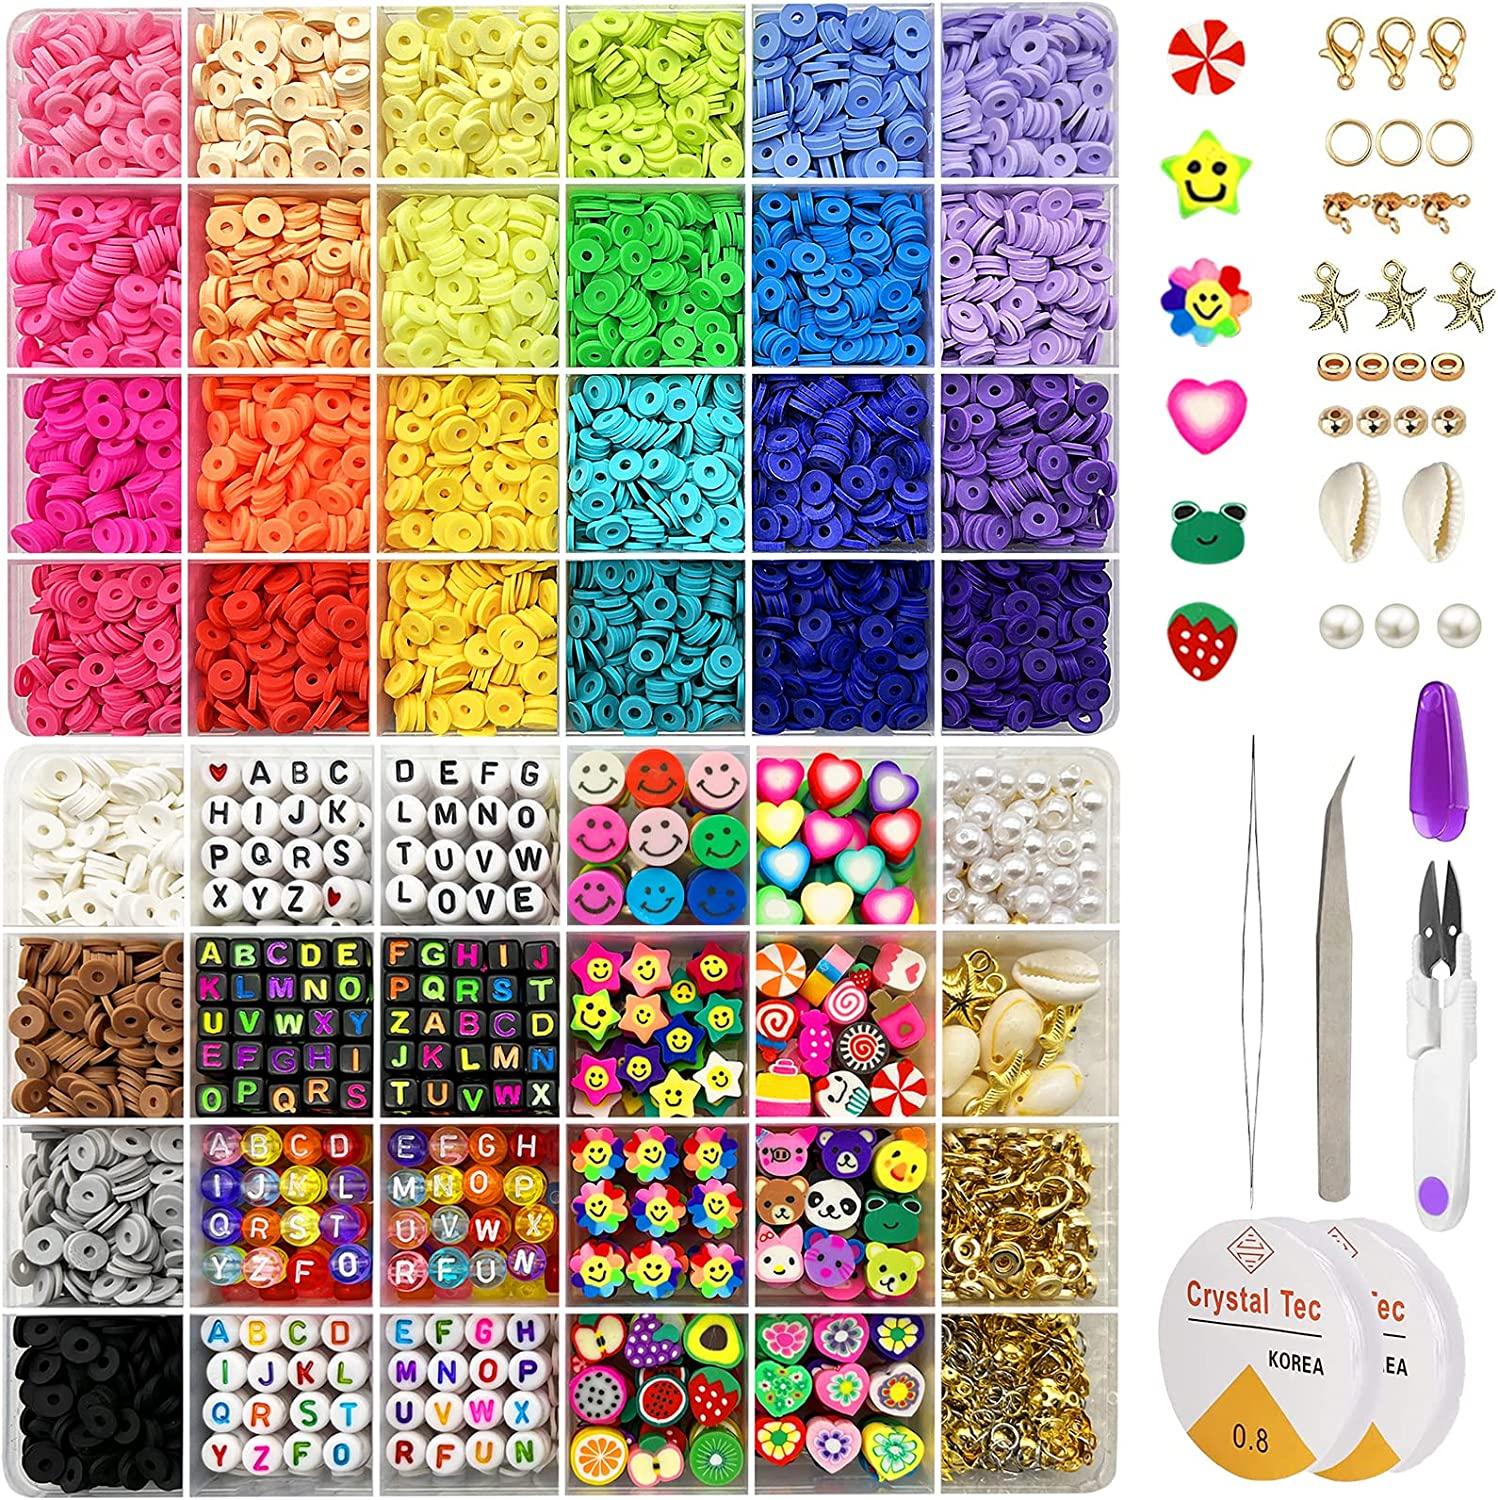 Hot Selling Colorful Loose Beads 4mm Plastic Glass Jewelry Making For Bracelet Necklace Clay Bead Letter Bead Kit DIY Toy 1600603971664